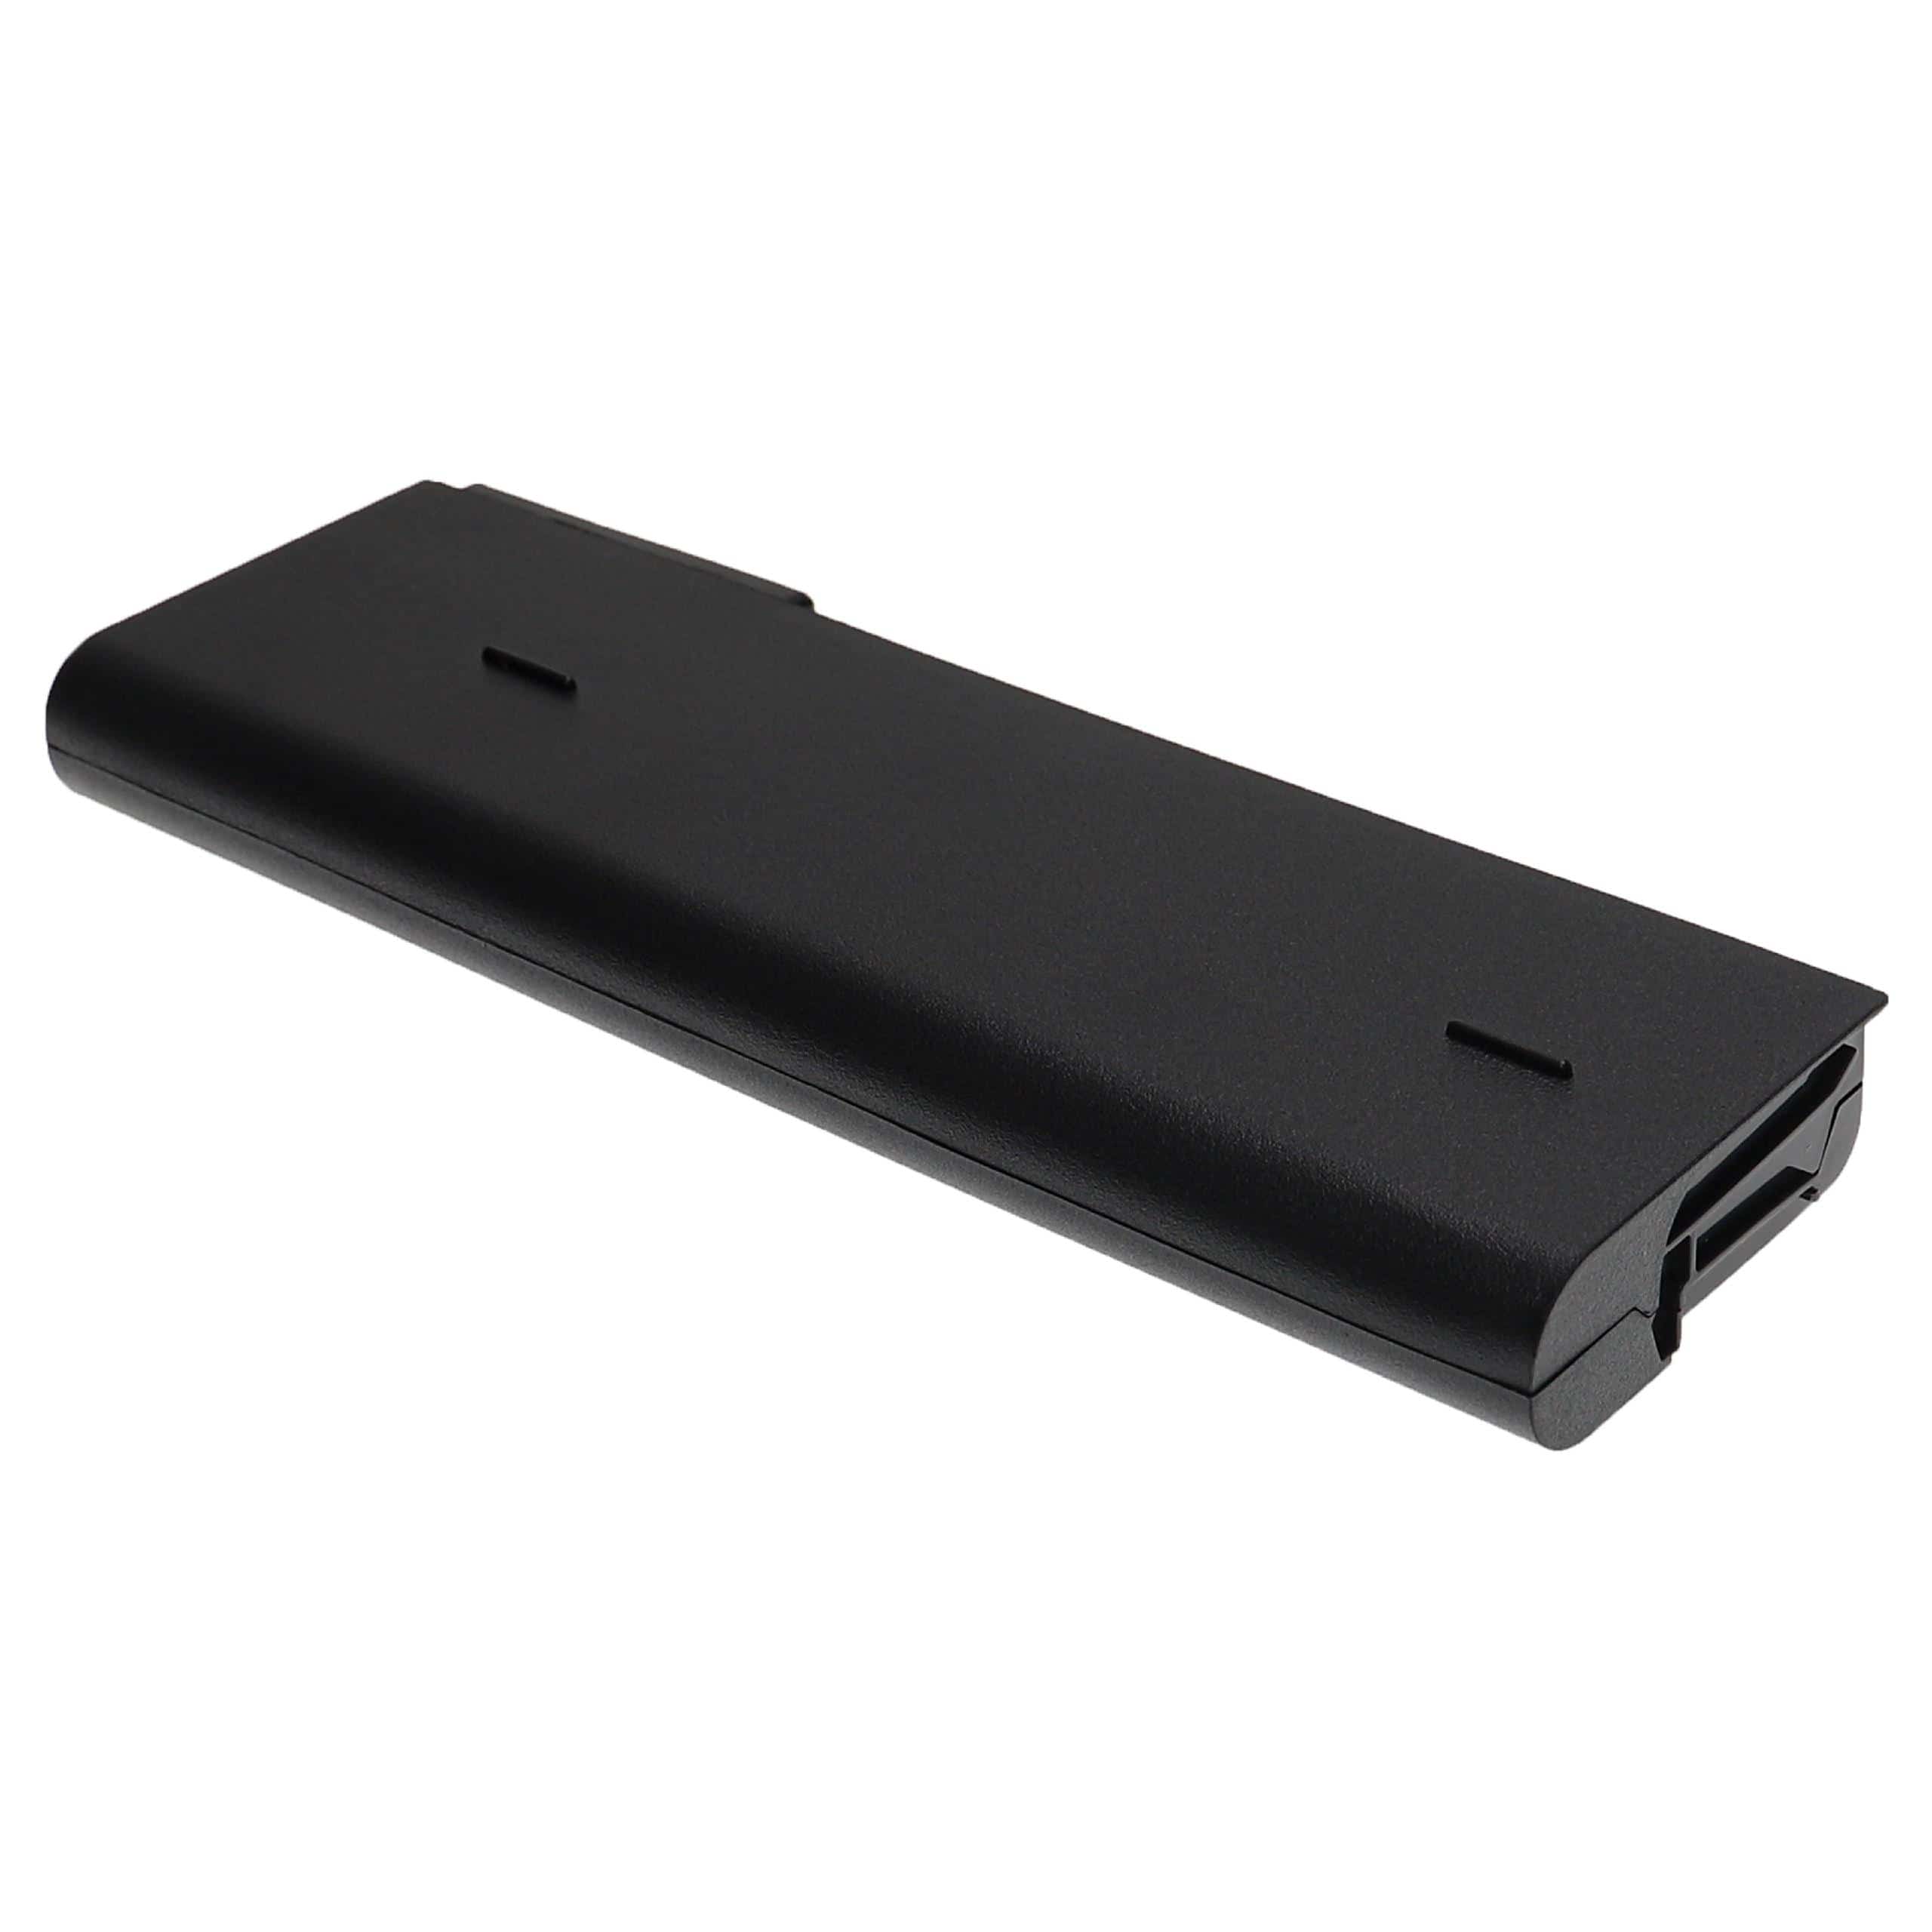 Notebook Battery Replacement for HP 718676-121, 718675-141, 718675-142, 718675-121 - 8400mAh 10.8V Li-Ion